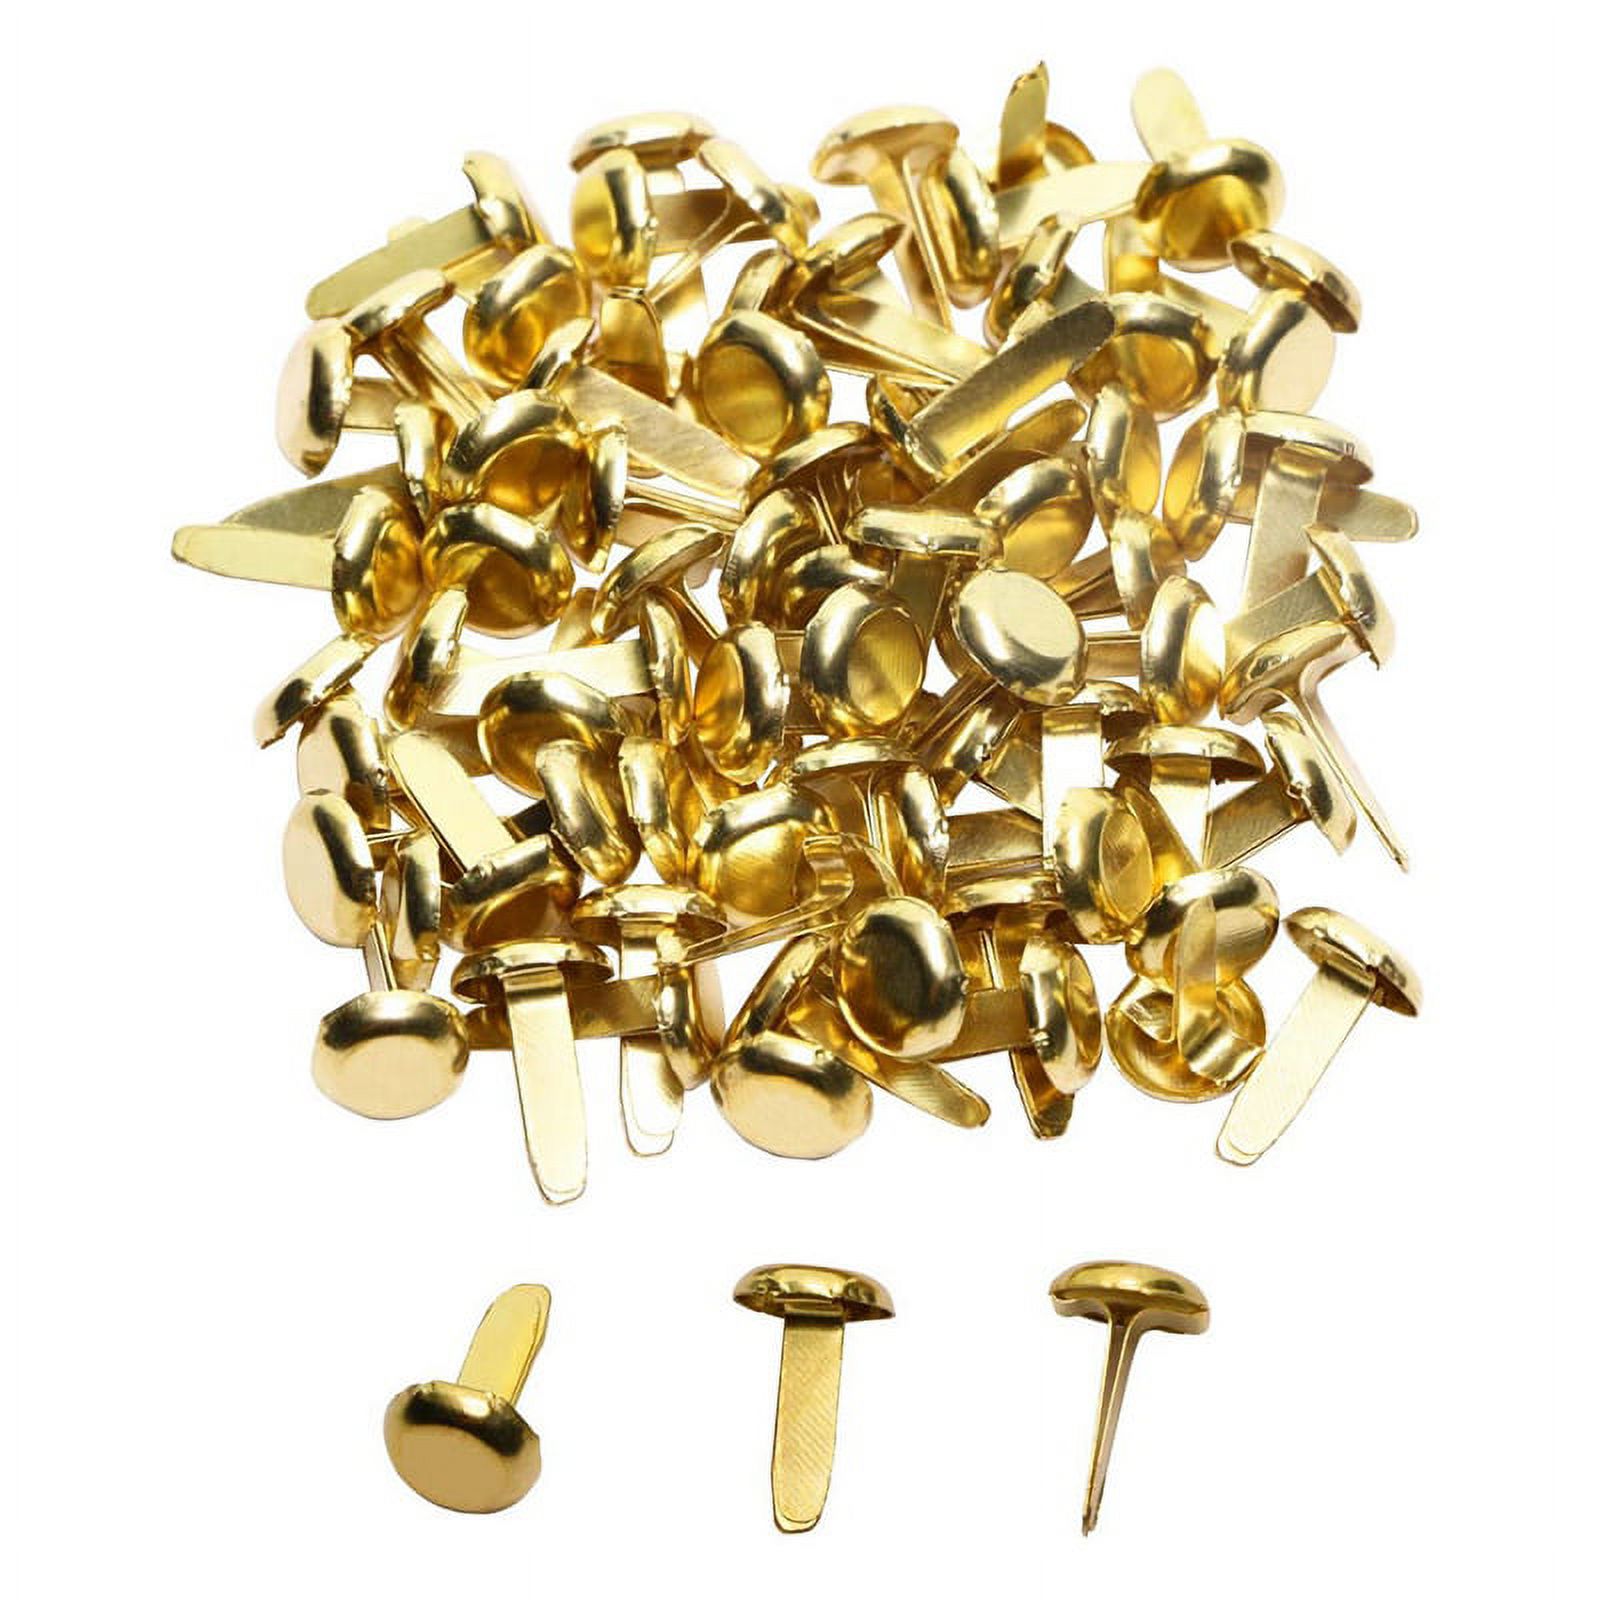 1/2 inch Brass Paper Fasteners, Mini Paper Fasteners for Handicraft Projects, Decorative DIY Supplies, 8 x 14 mm (Gold), Men's